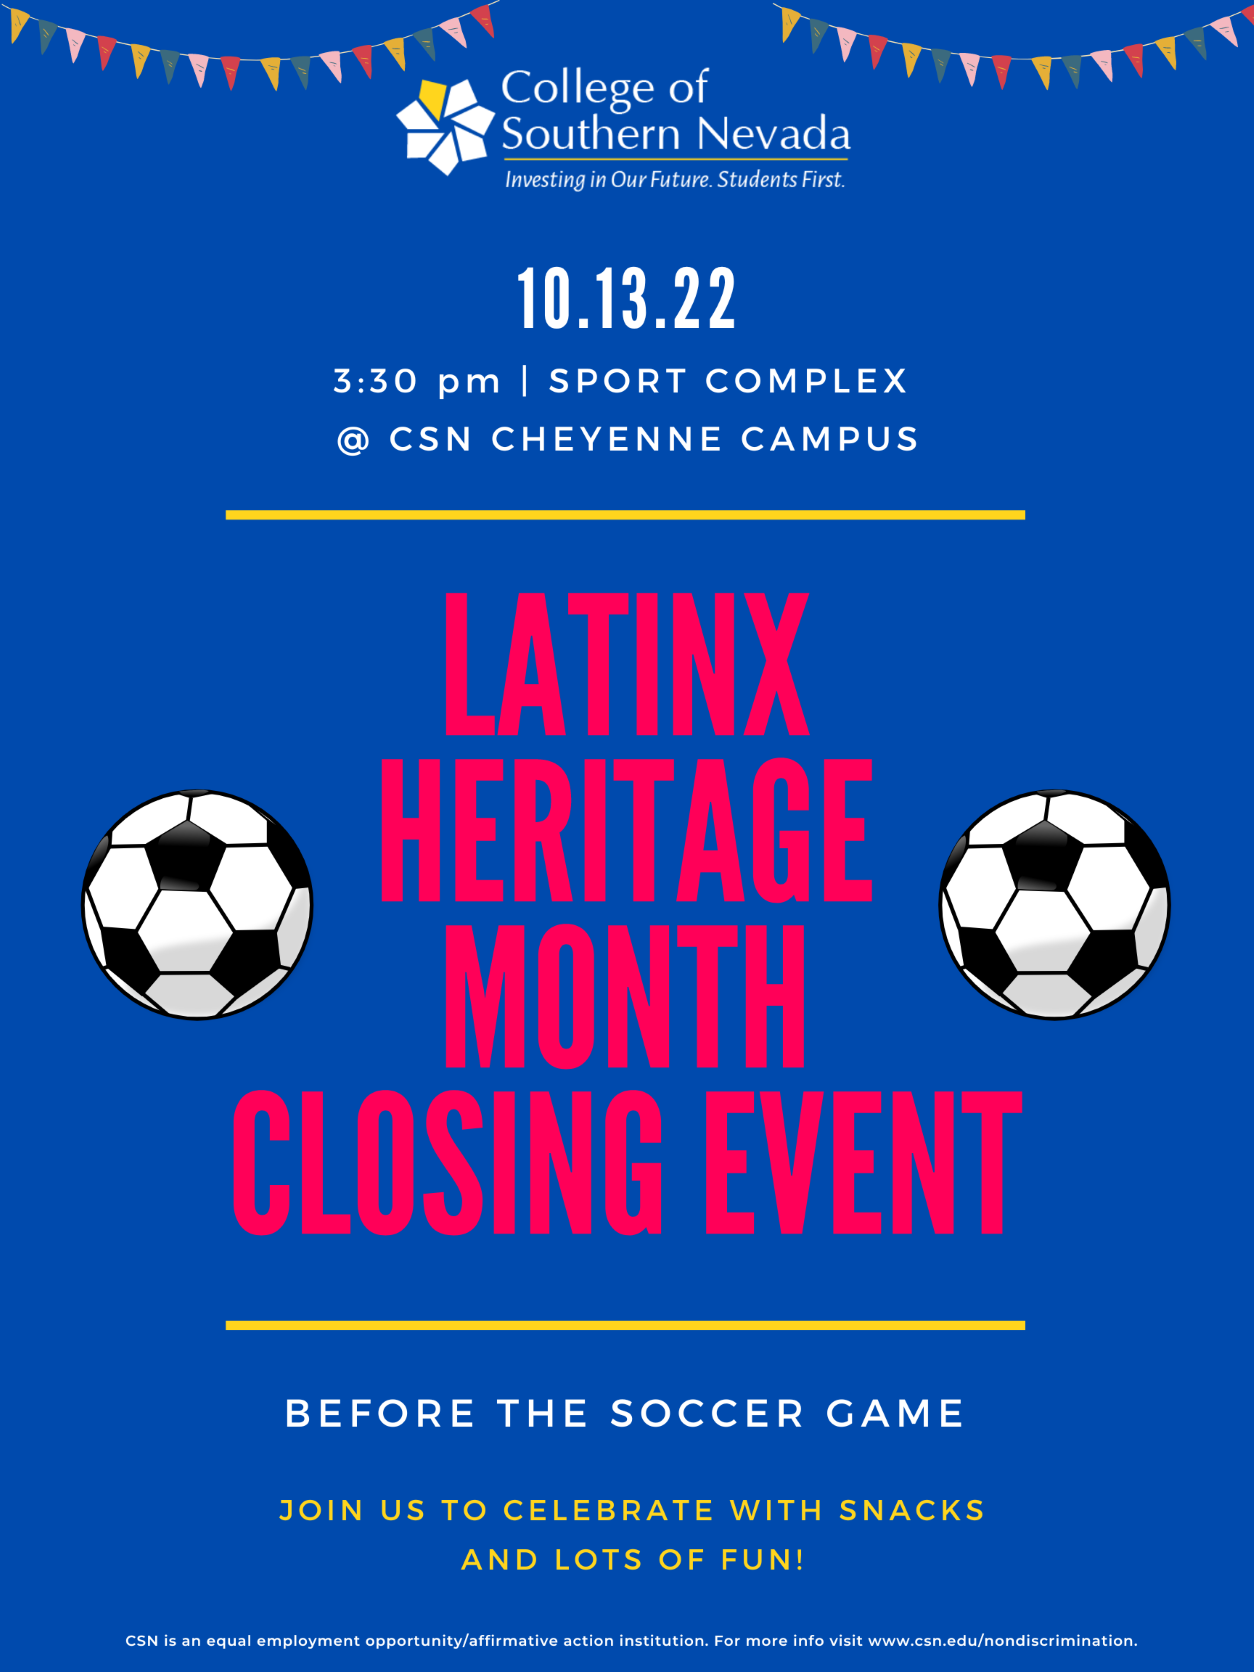 Latinx Heritage Month Closing Event on October 13, 2022